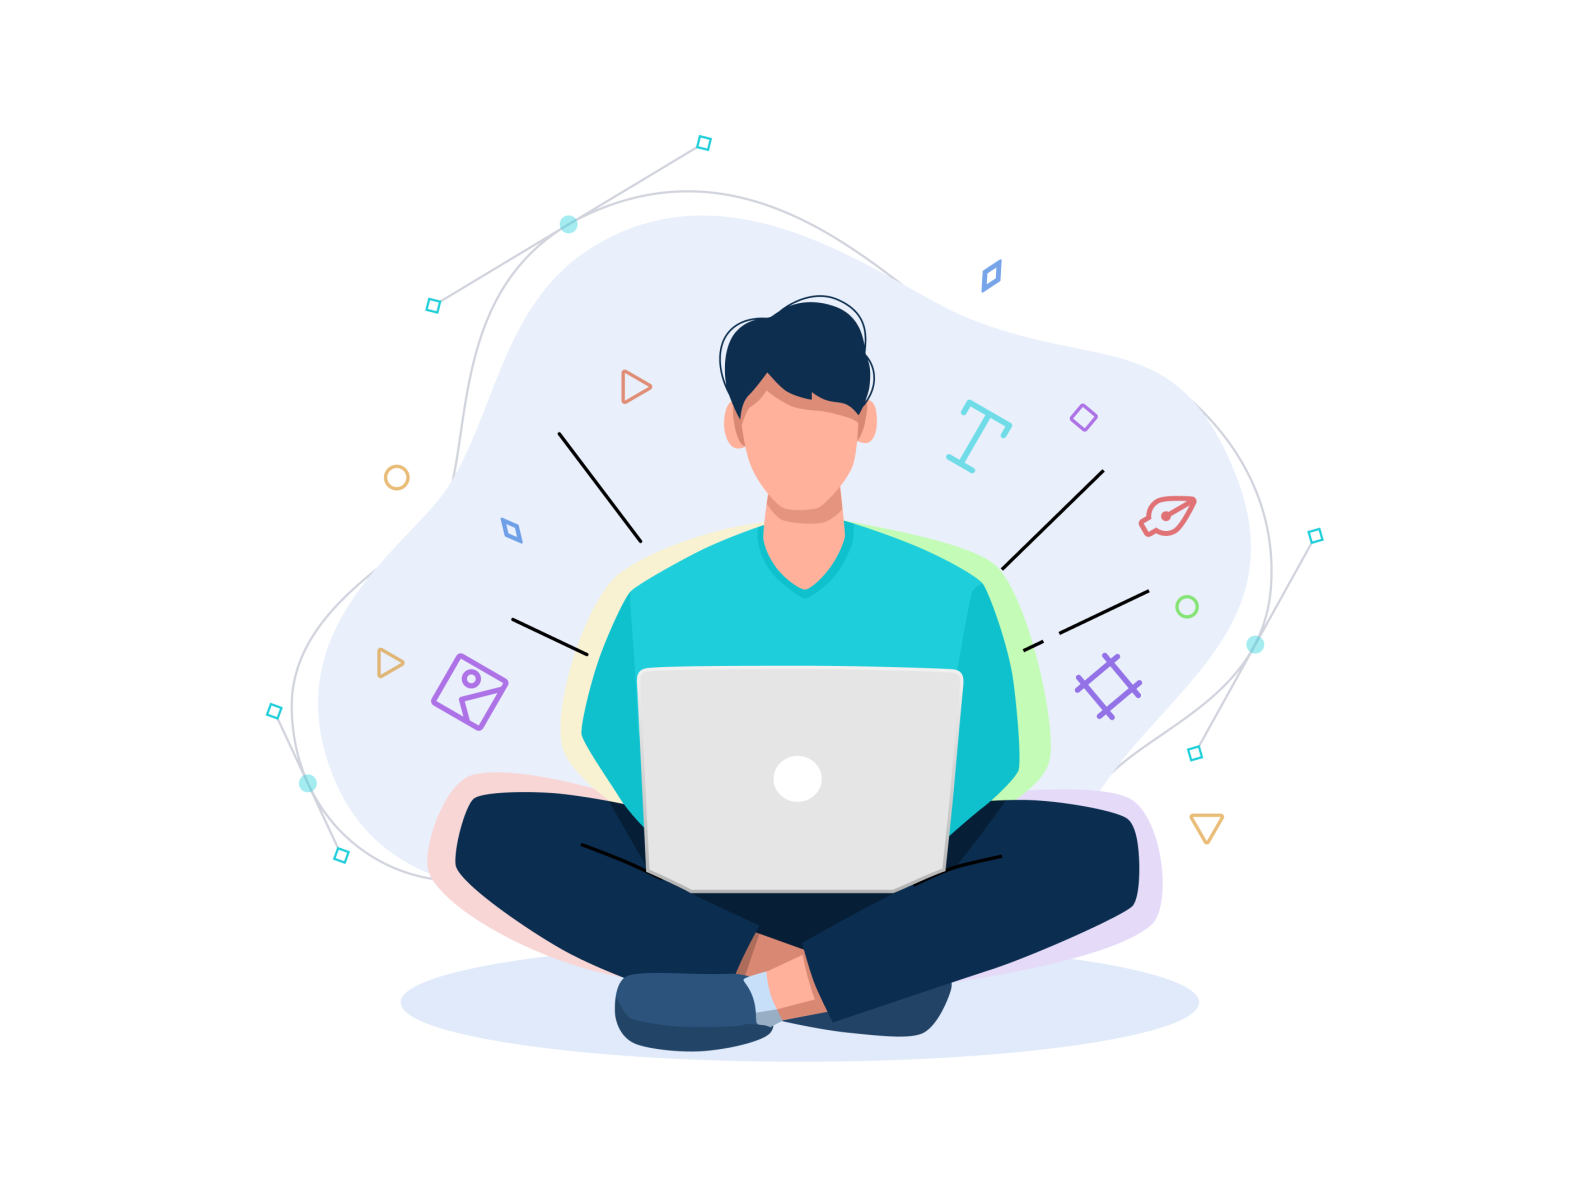 Working in Figma - Illustration by Dusan Tomic on Dribbble